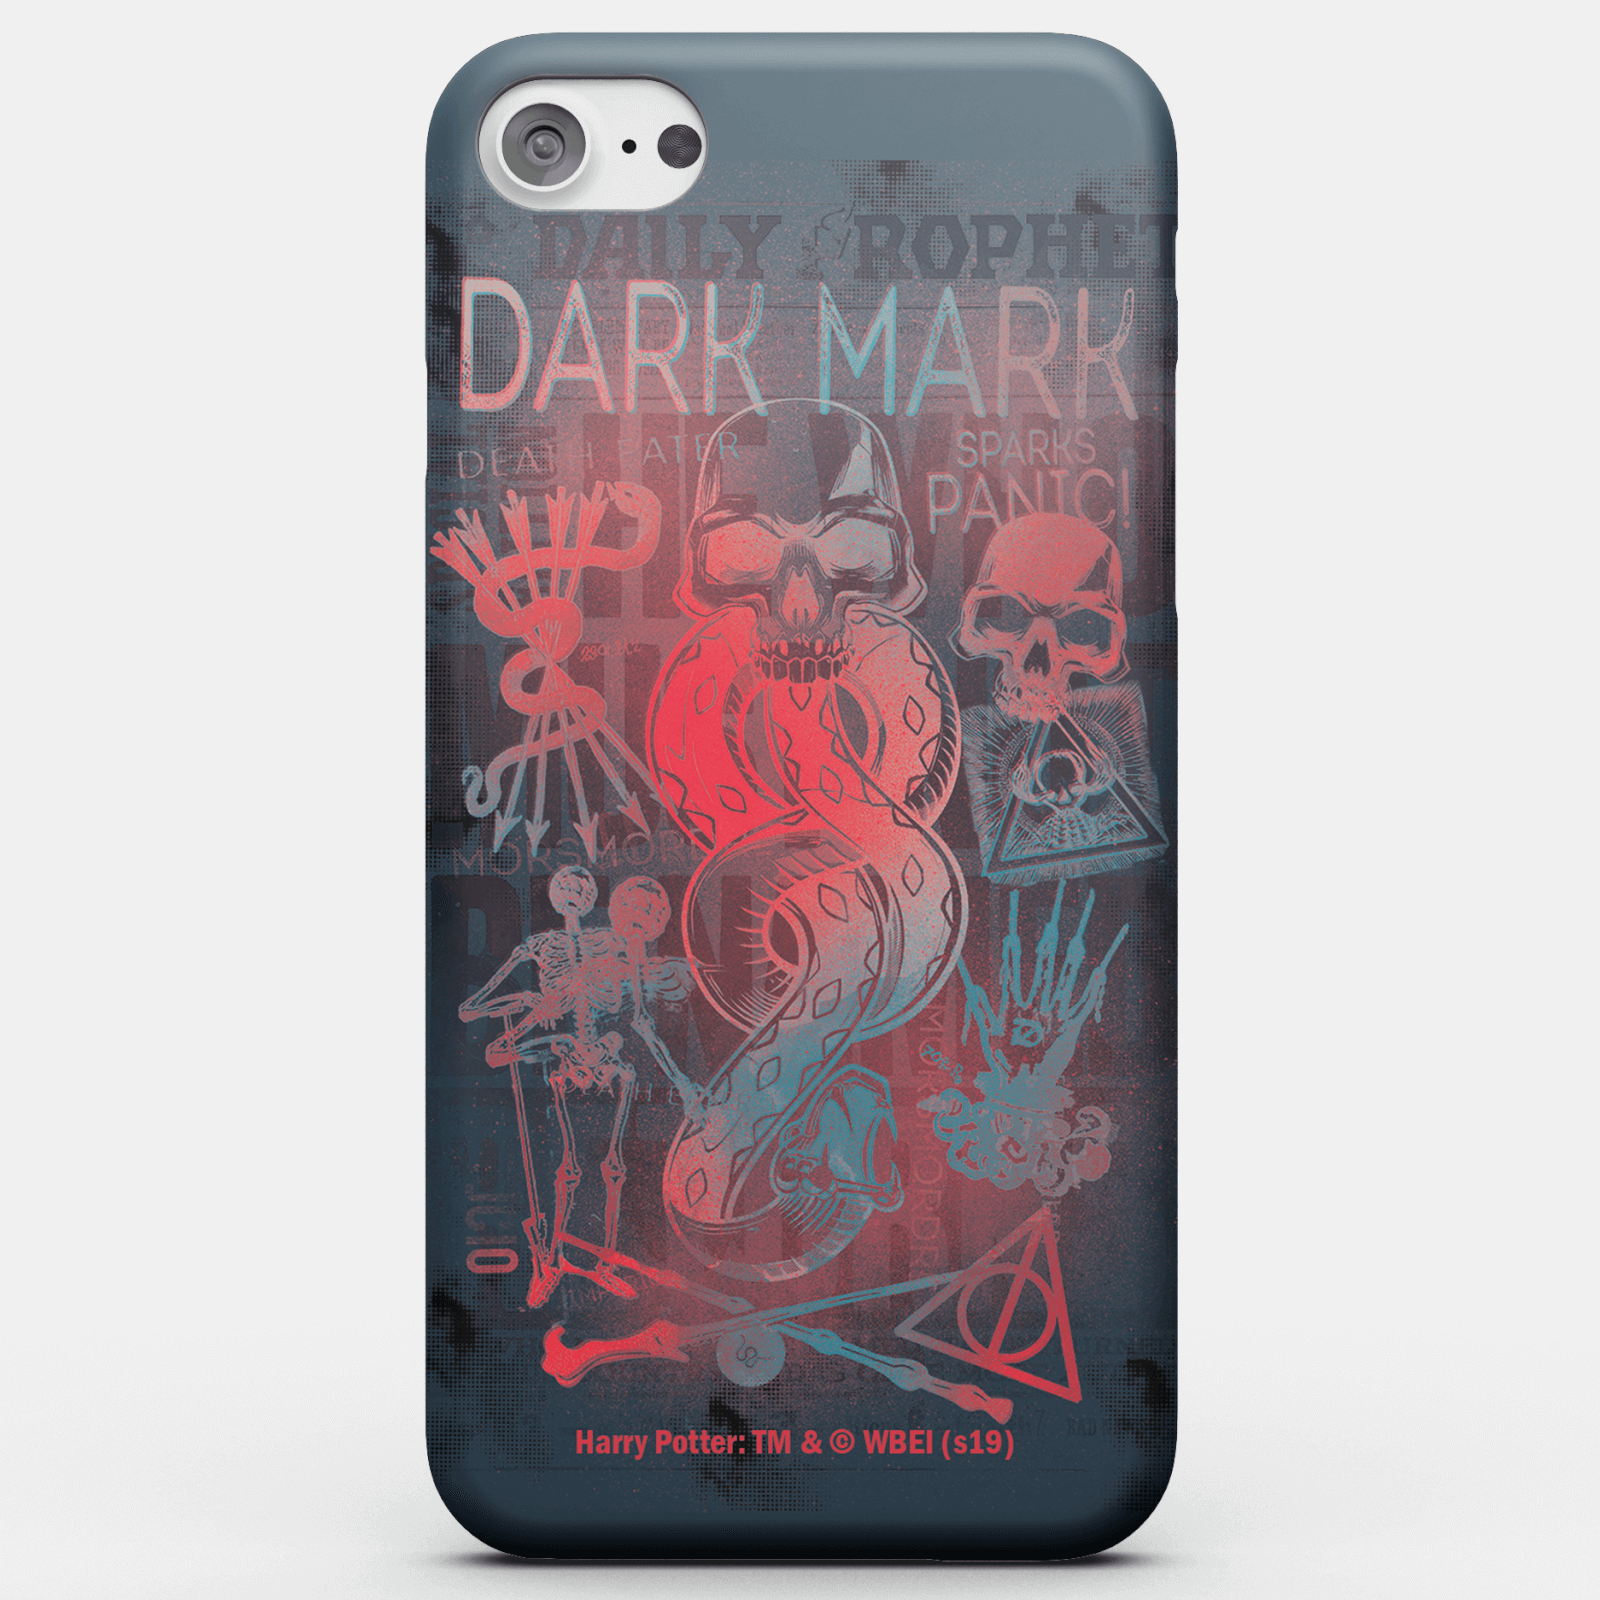 Harry Potter Phonecases Dark Mark Phone Case for iPhone and Android - iPhone 5/5s - Snap Case - Gloss